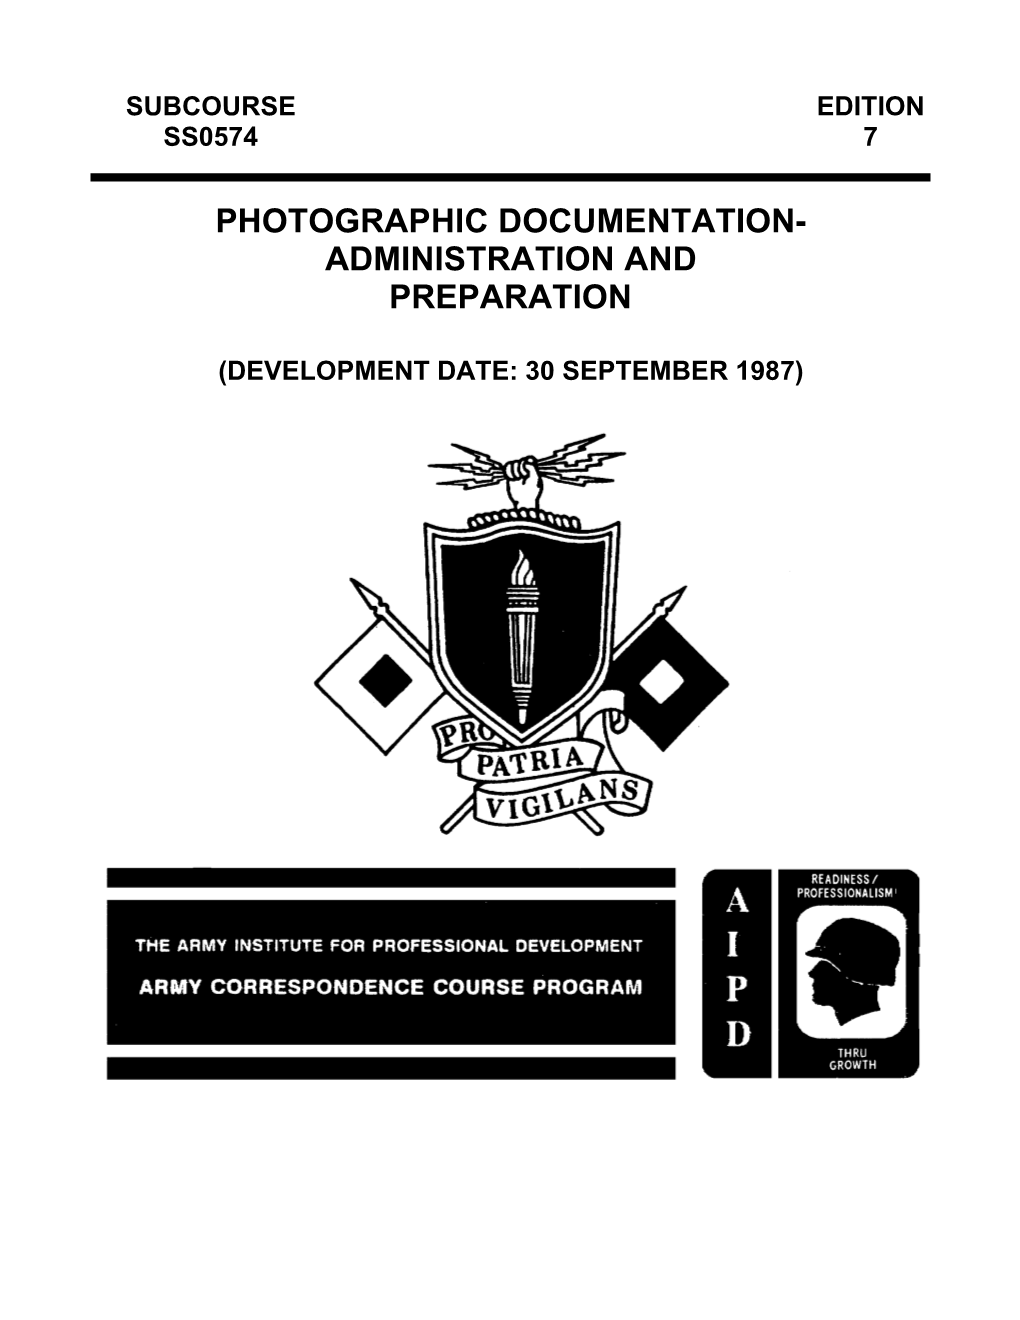 Photographic Documentation- Administration and Preparation